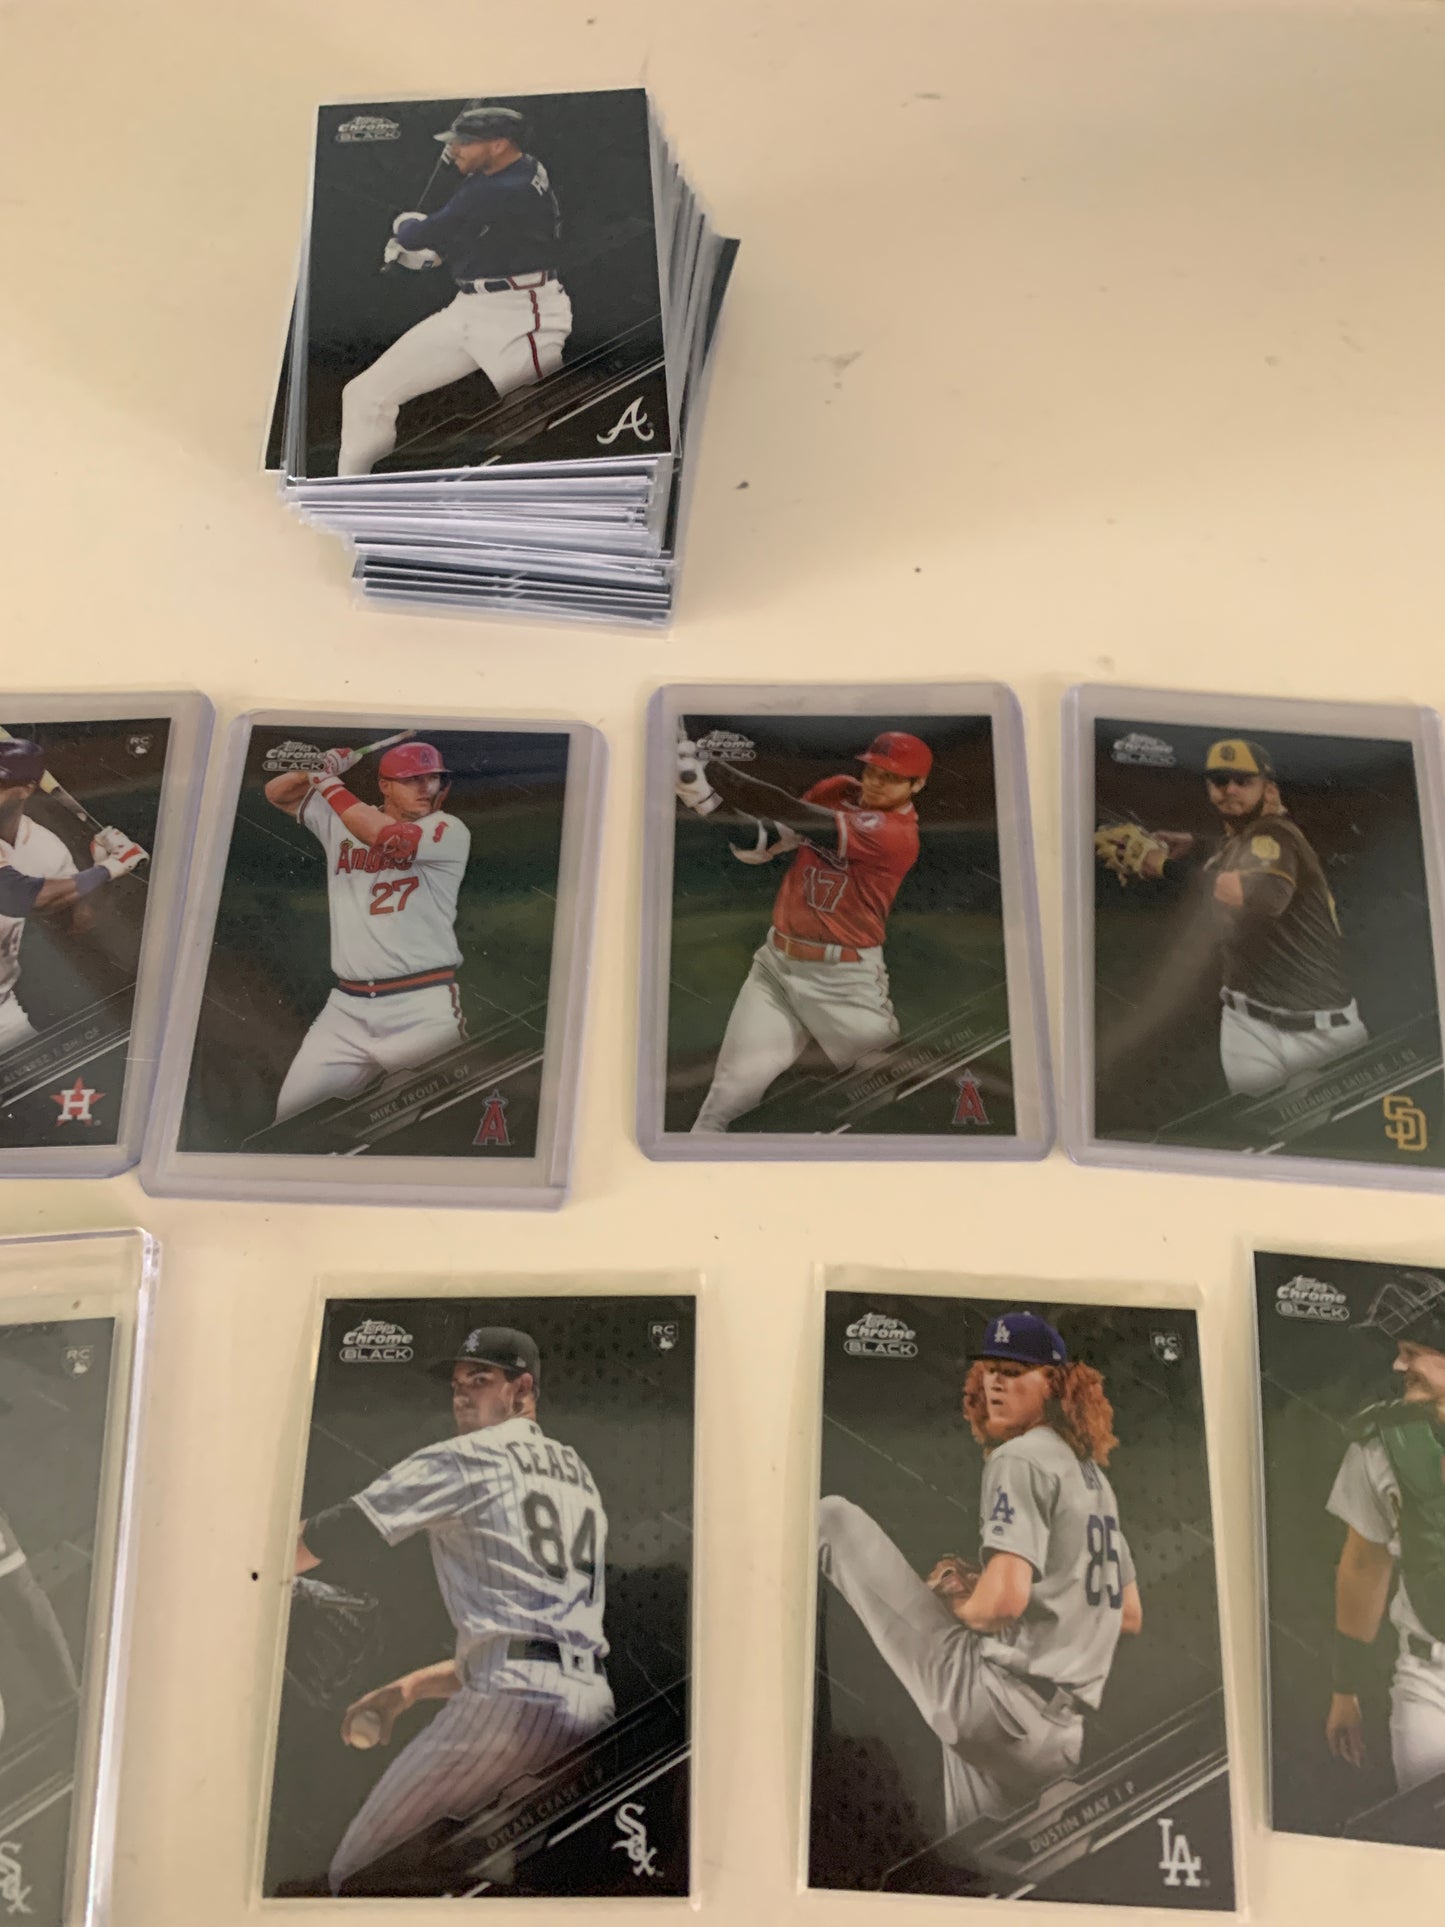 2021 Topps Chrome Black Baseball Complete Set one of a kind hand collected mint condition